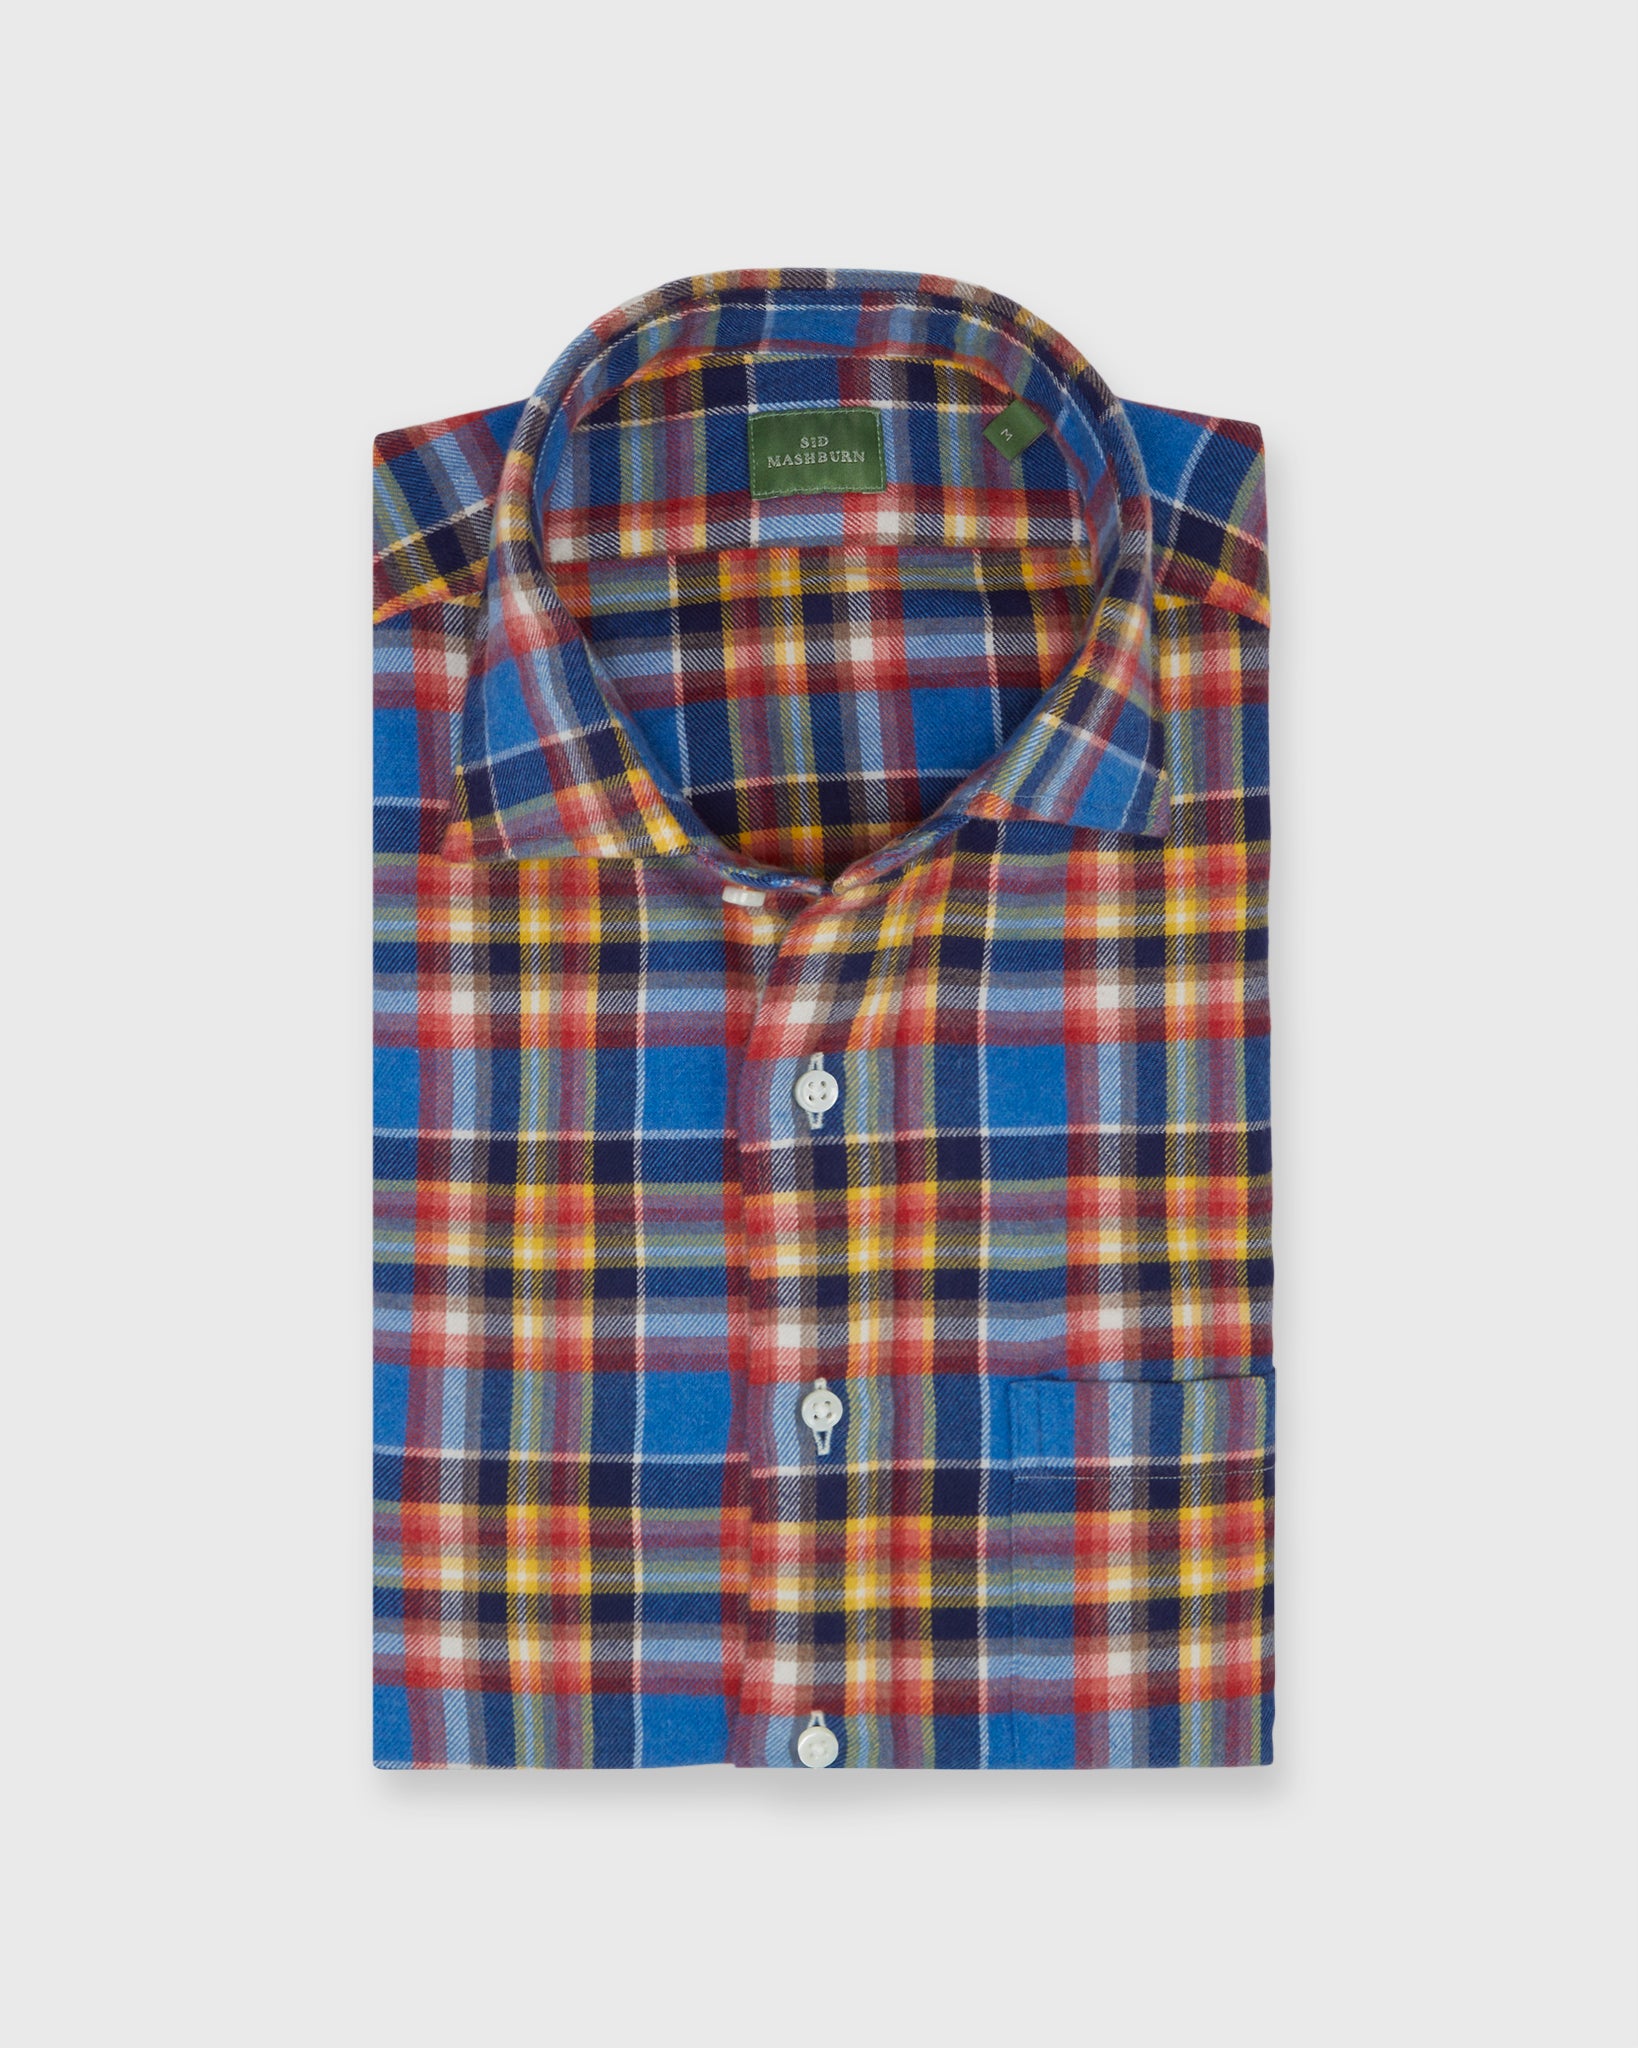 Spread Collar Sport Shirt in Blue/Red/Gold Plaid Flannel